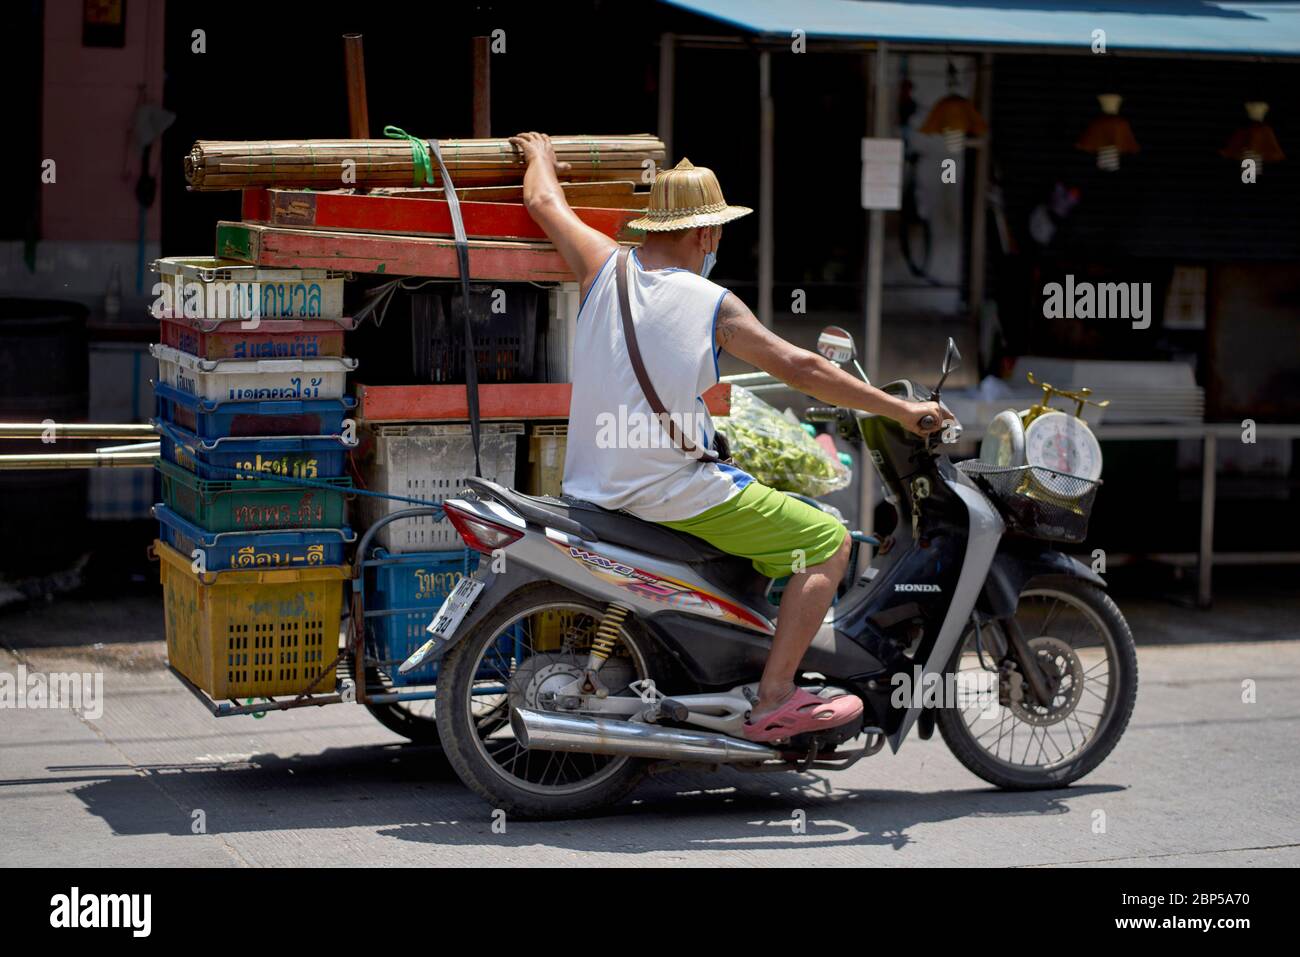 Thailand transport. Man riding a motorcycle sidecar rig on the way to his  site as a street market trader. Southeast Asia Stock Photo - Alamy